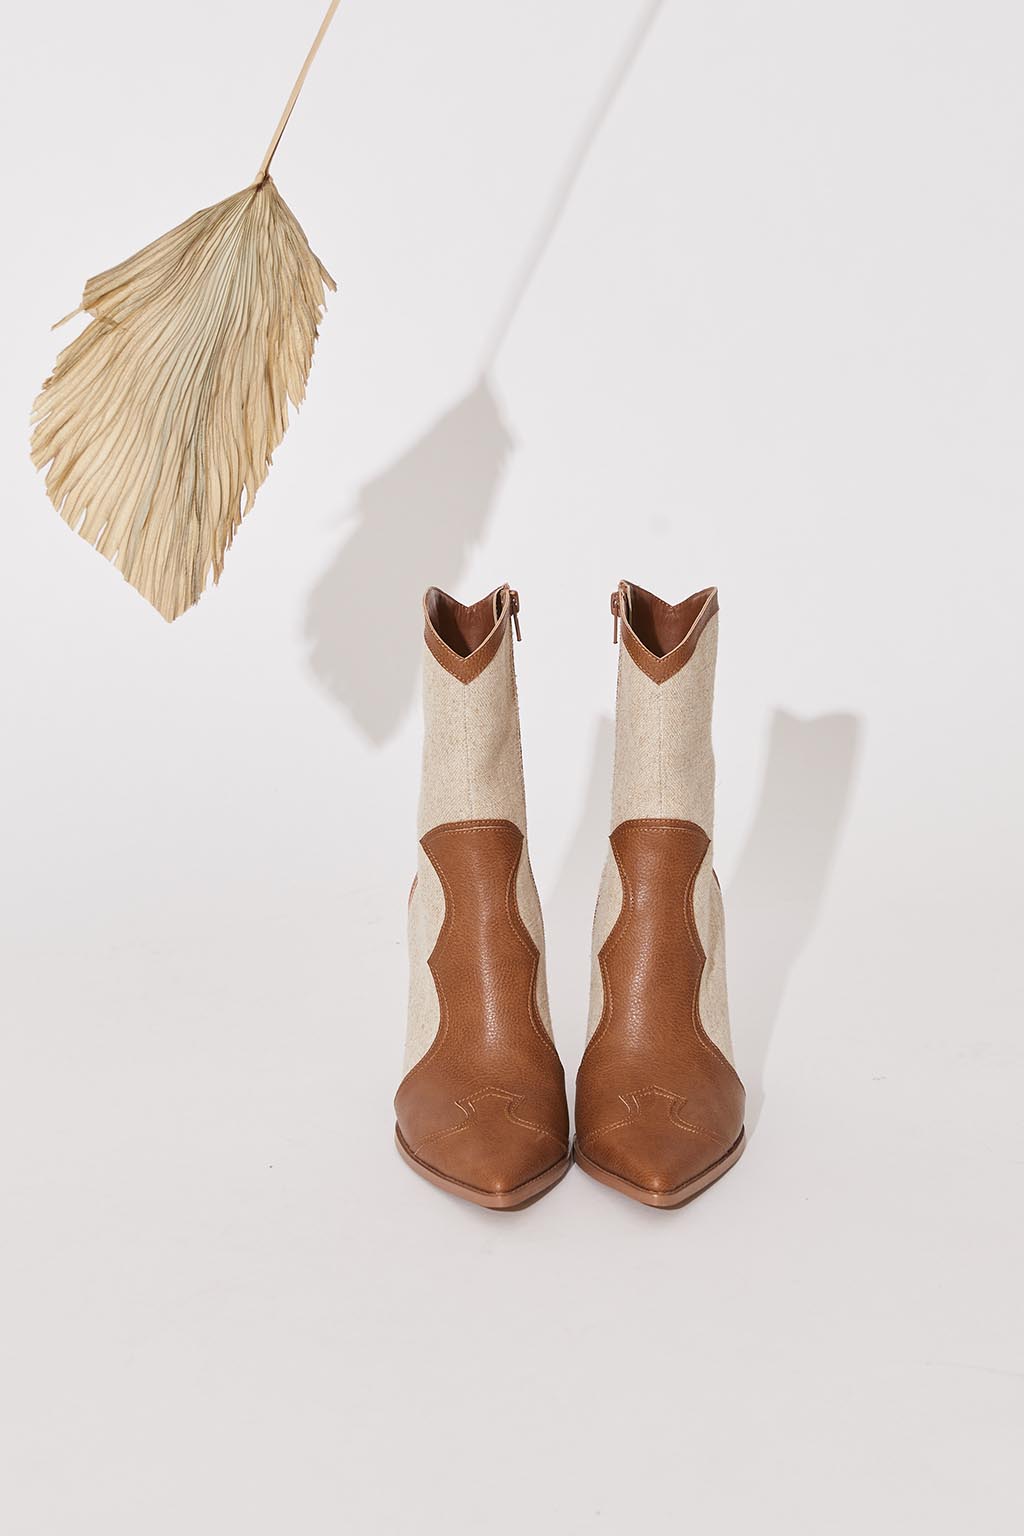 western-boots-canel-03